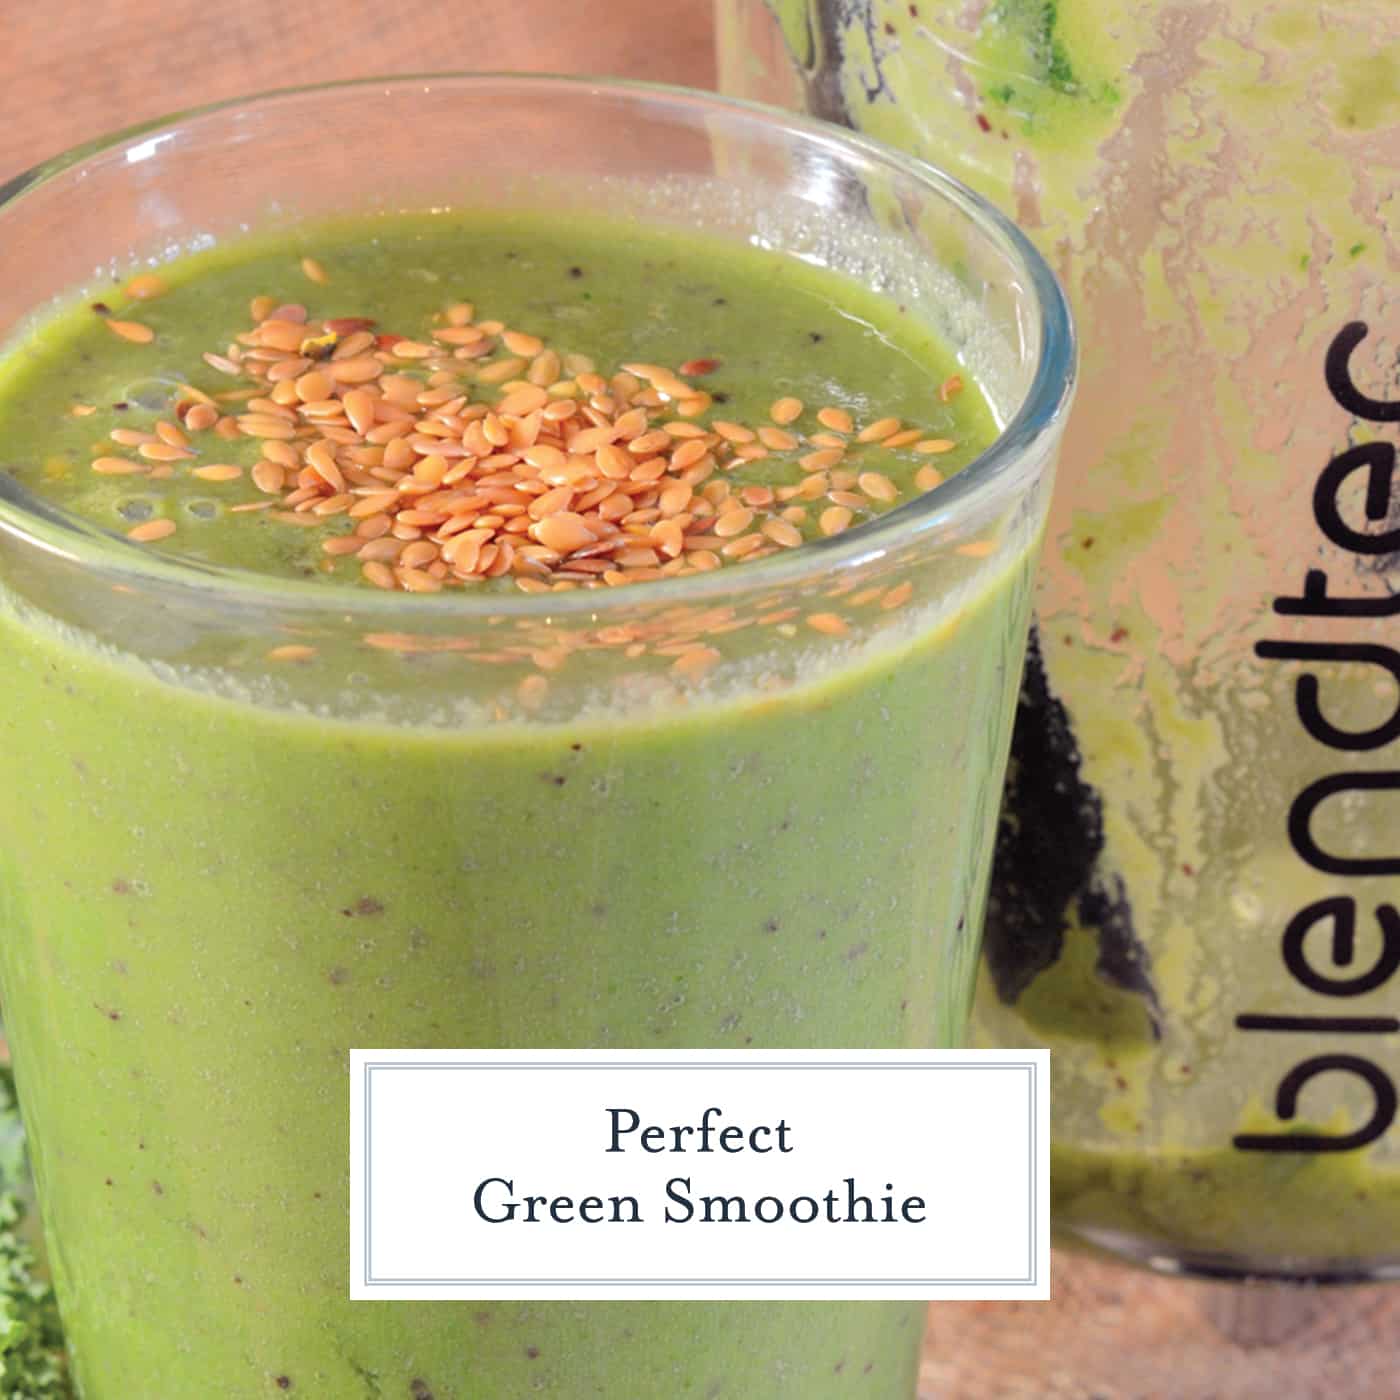 There are many ways to make a Green Smoothie, but here is the simple formula with my favorite blend! #greensmoothie #smoothierecipes www.savoryexperiments.com